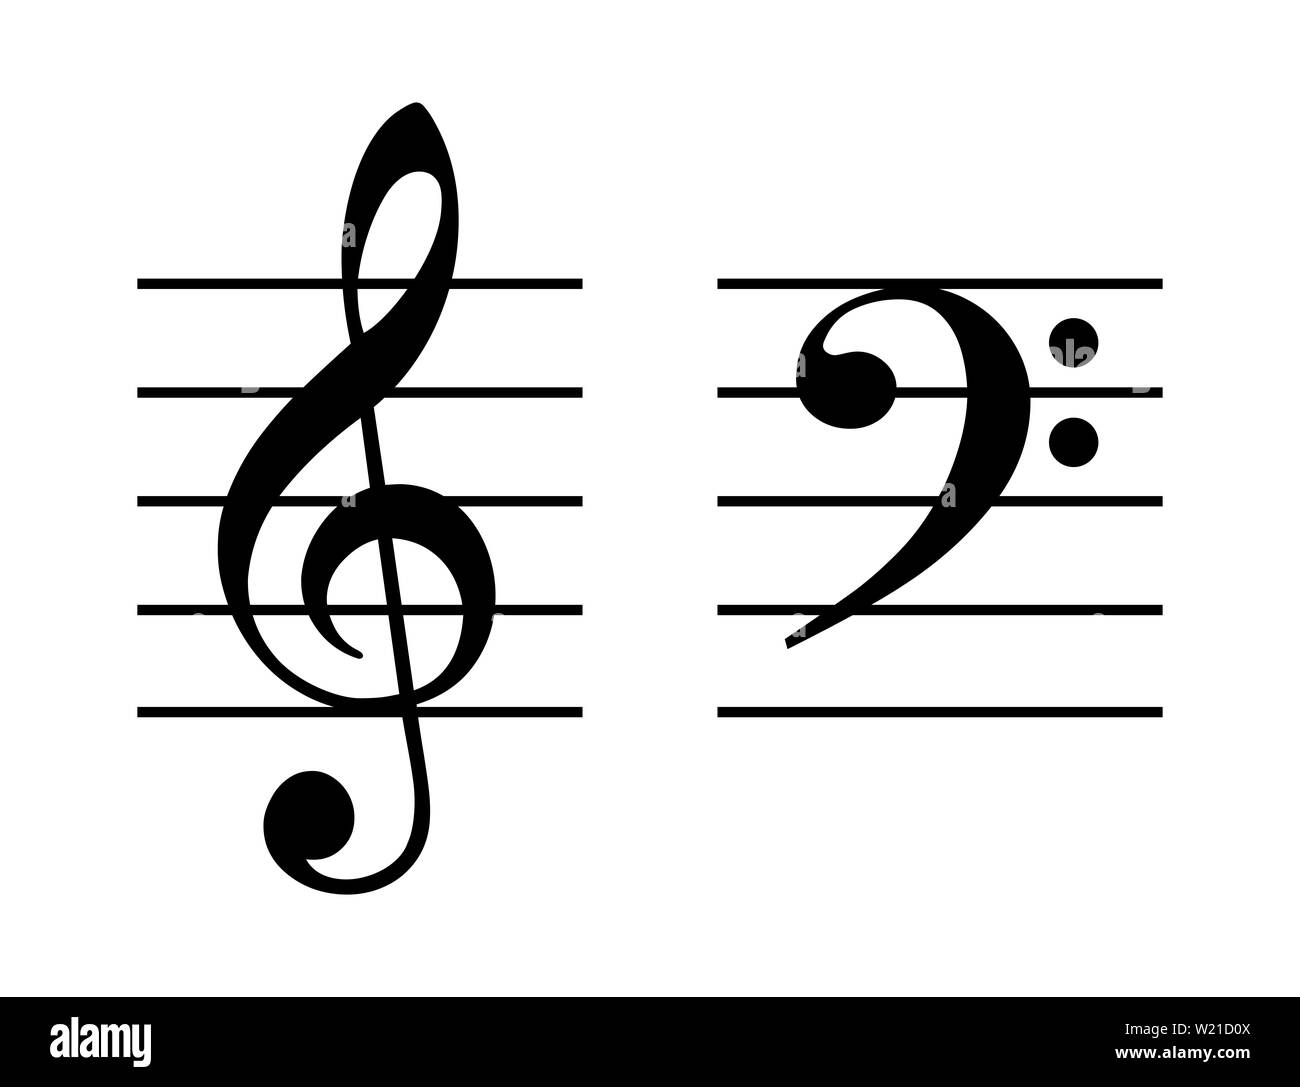 Treble and bass clef on five-line staff. G-clef placed on the second line and F-clef on fourth line of the stave. Two musical symbols. Stock Photo